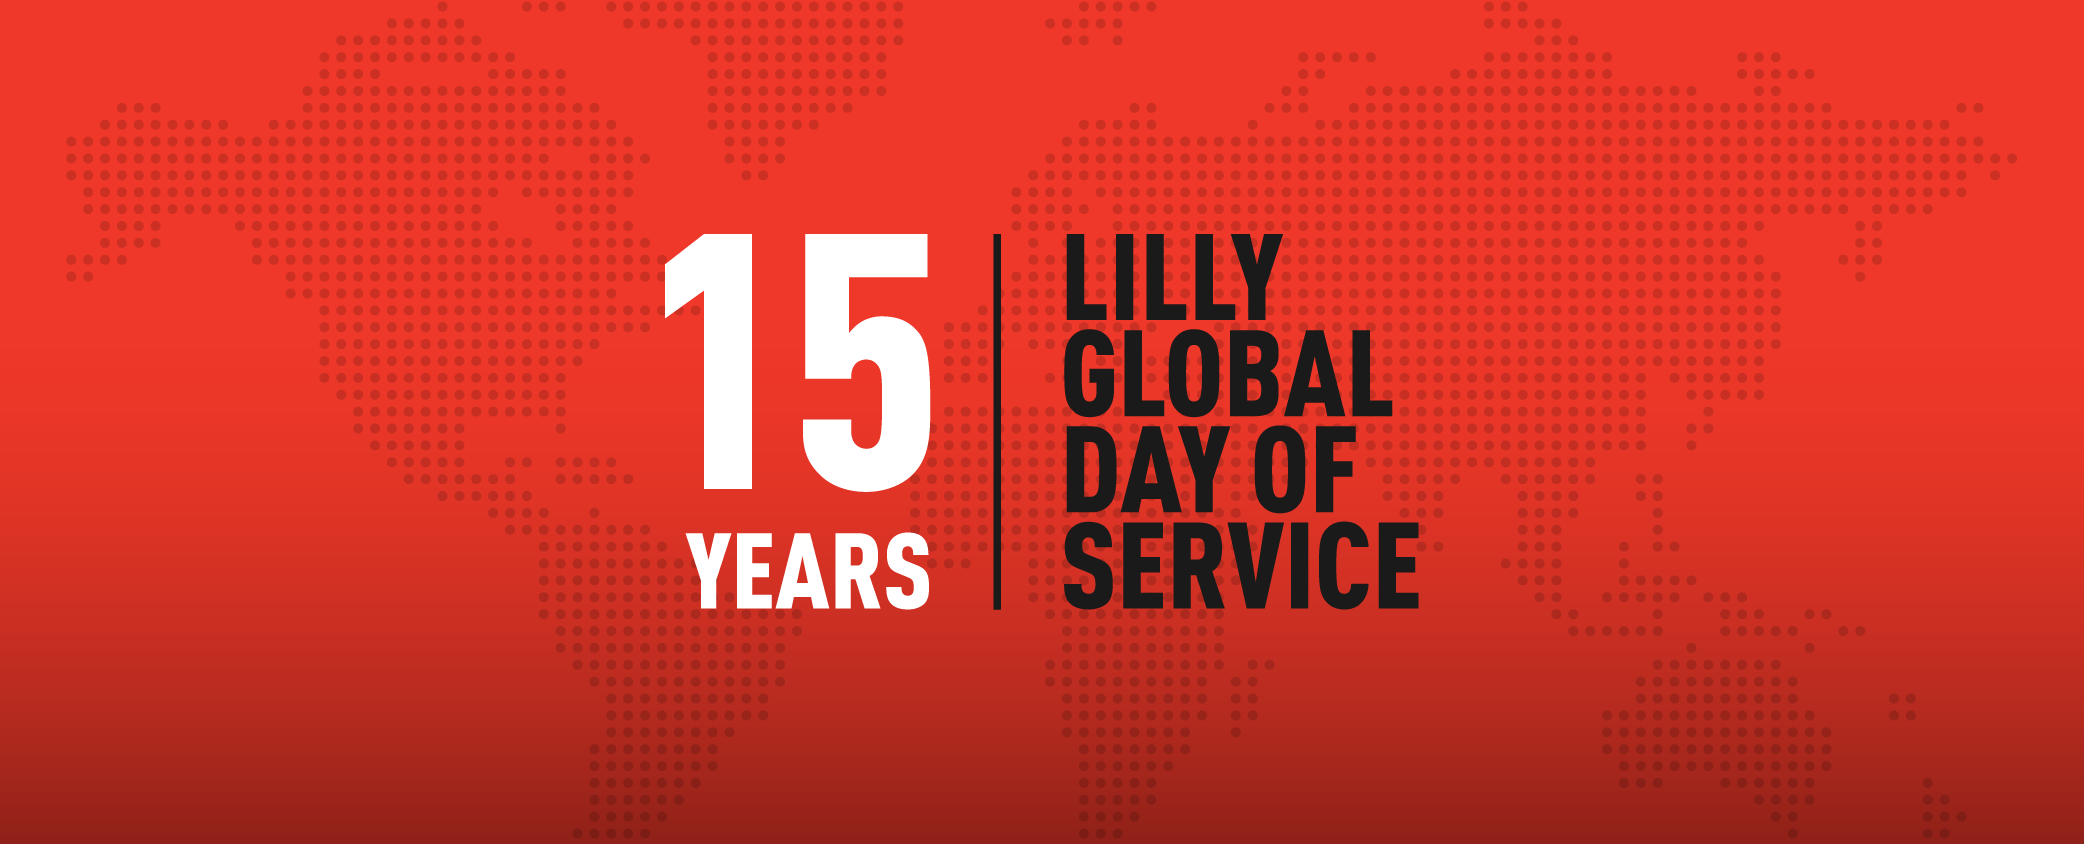 red background with dotted world map, logo reading: 15 years, Lilly Global Day of Service